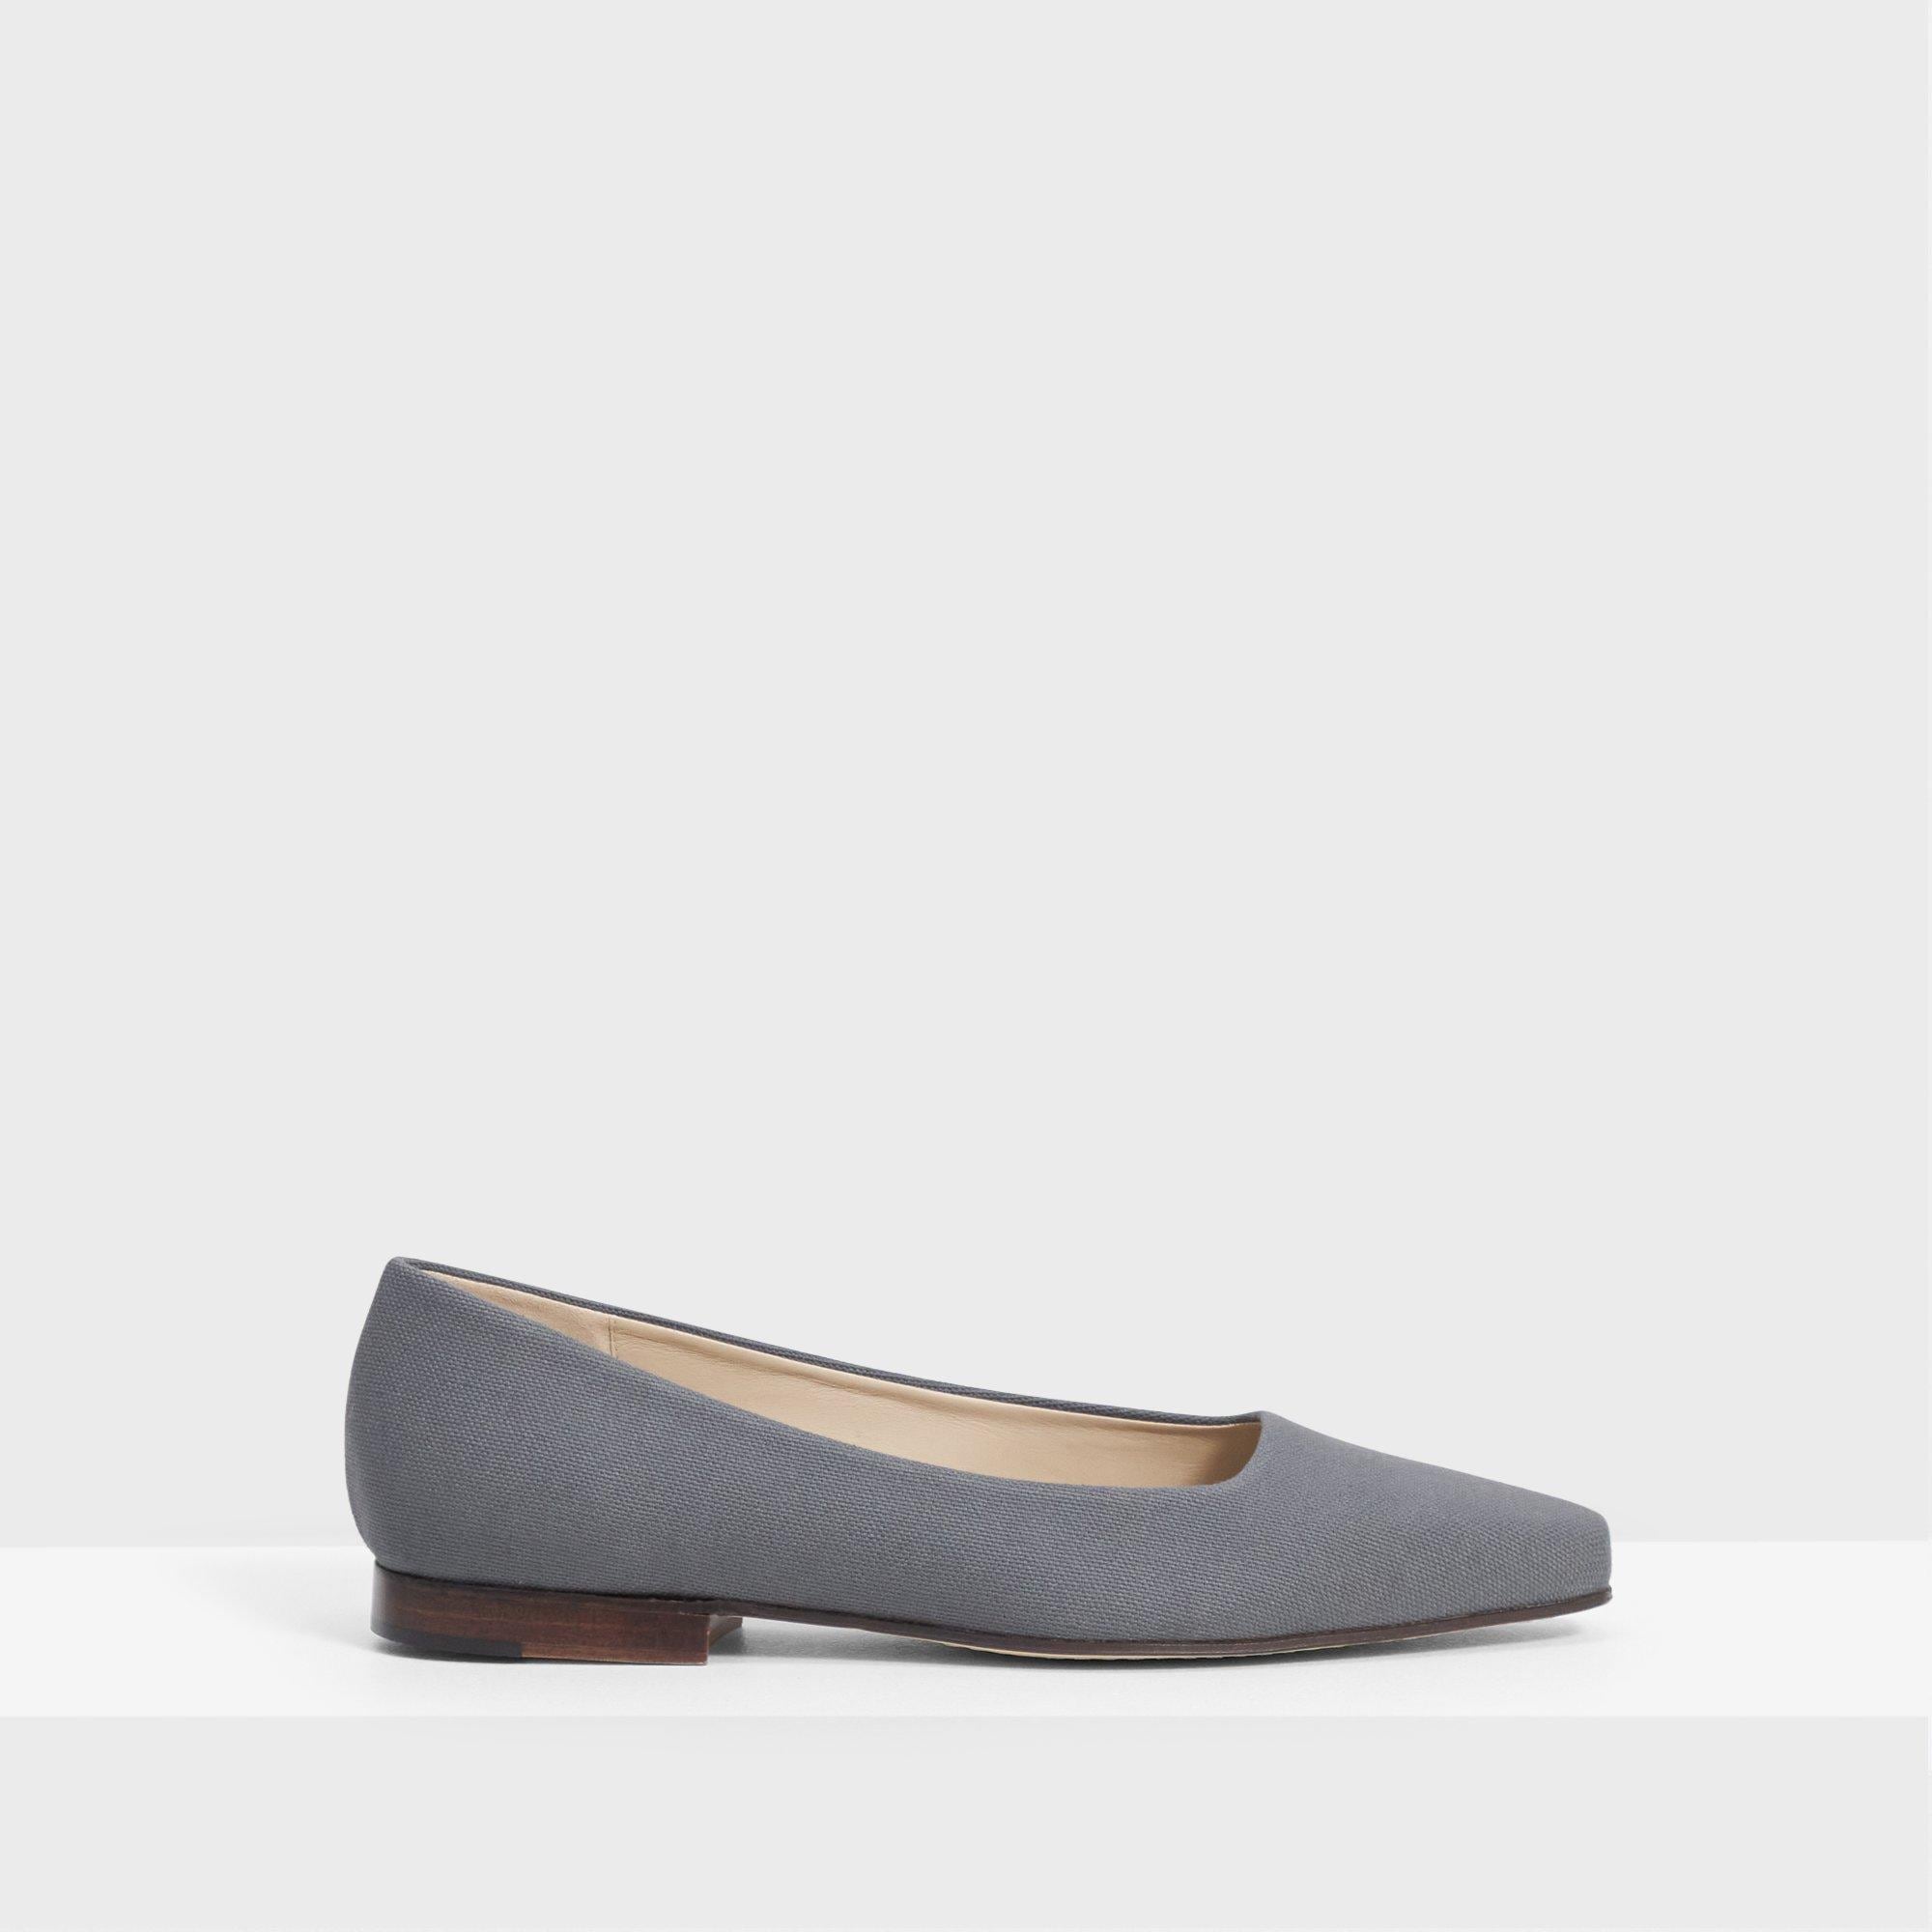 Theory Square Toe Flat in Cotton Canvas